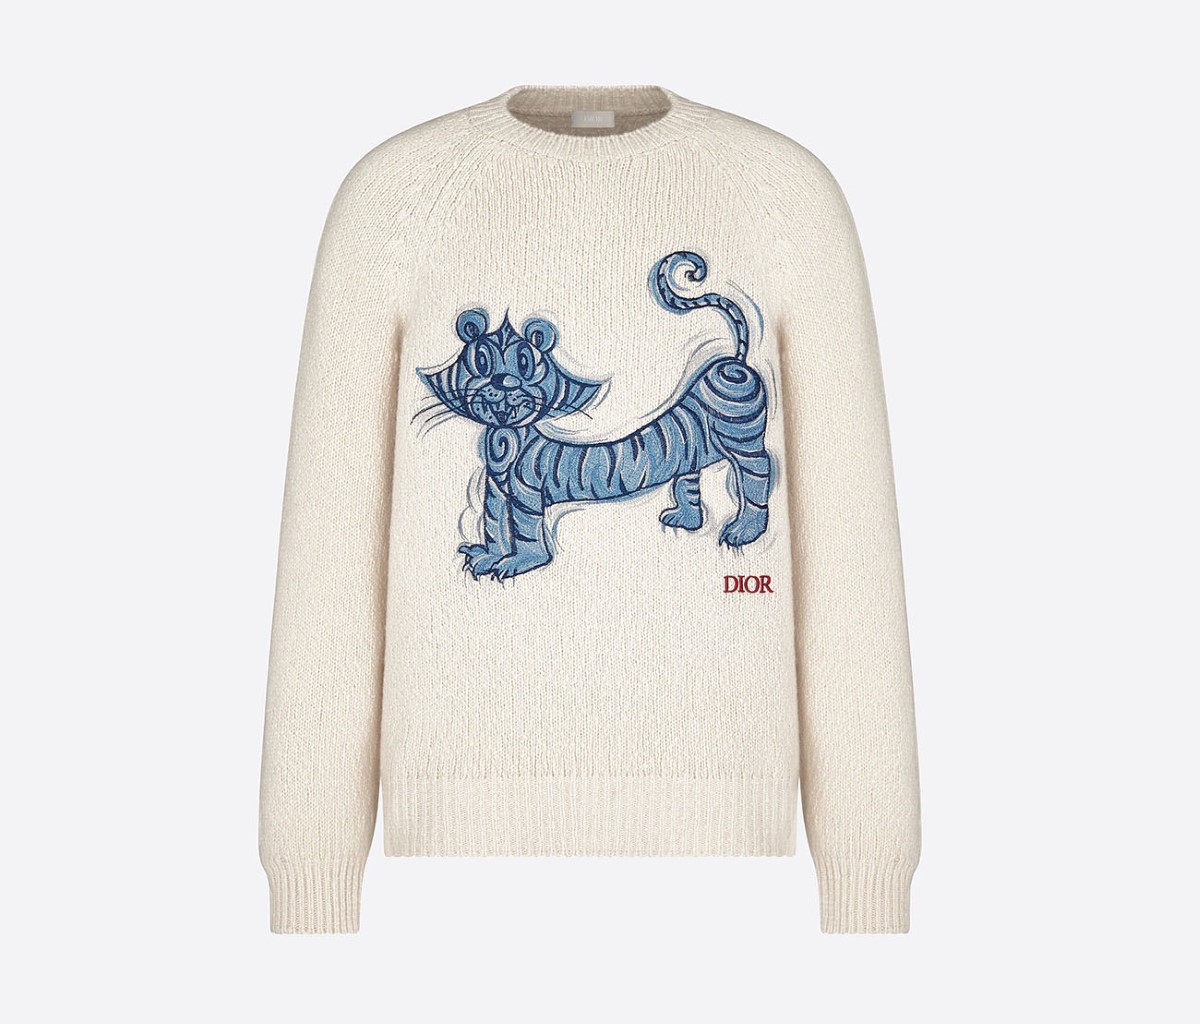 Dior Men celebrates the Year of the Tiger with a Lunar New Year capsule collection